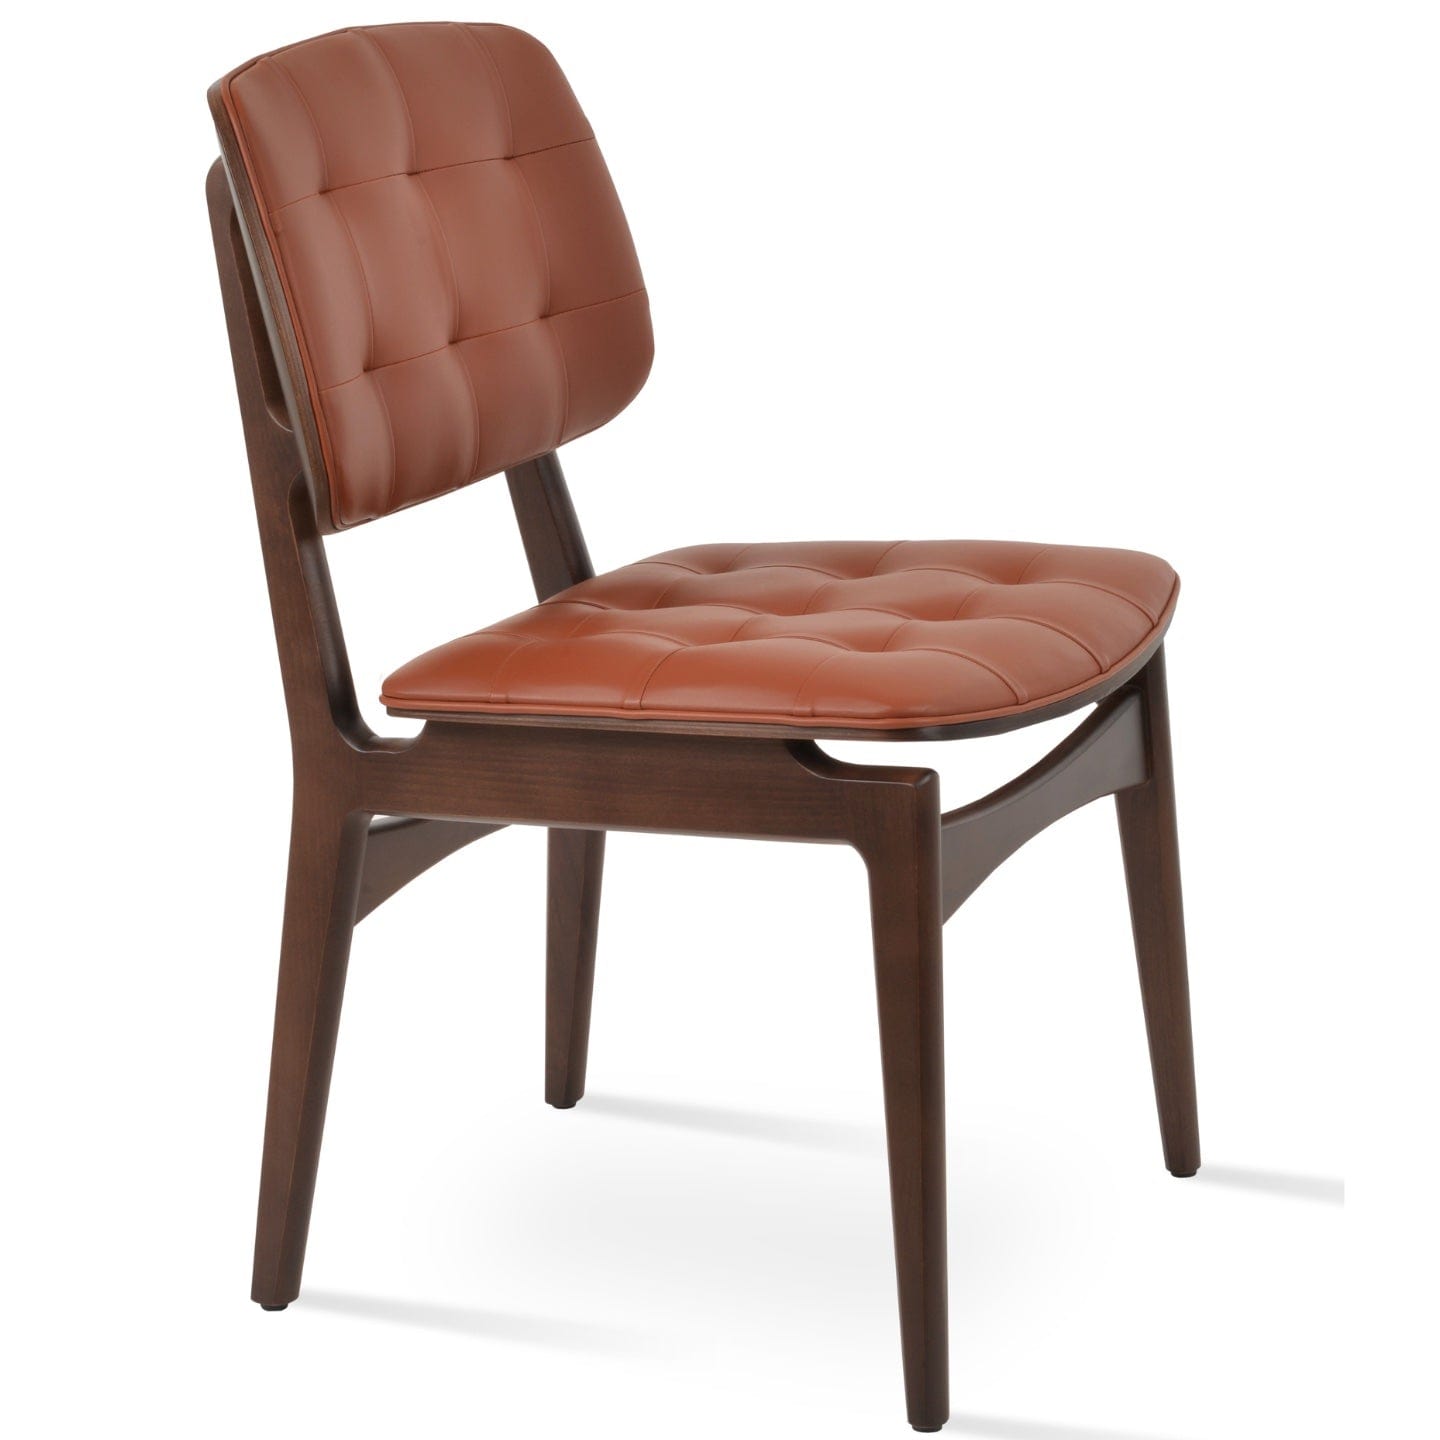 Valencia Tufted Brown Leather Dining Chairs - Your Bar Stools